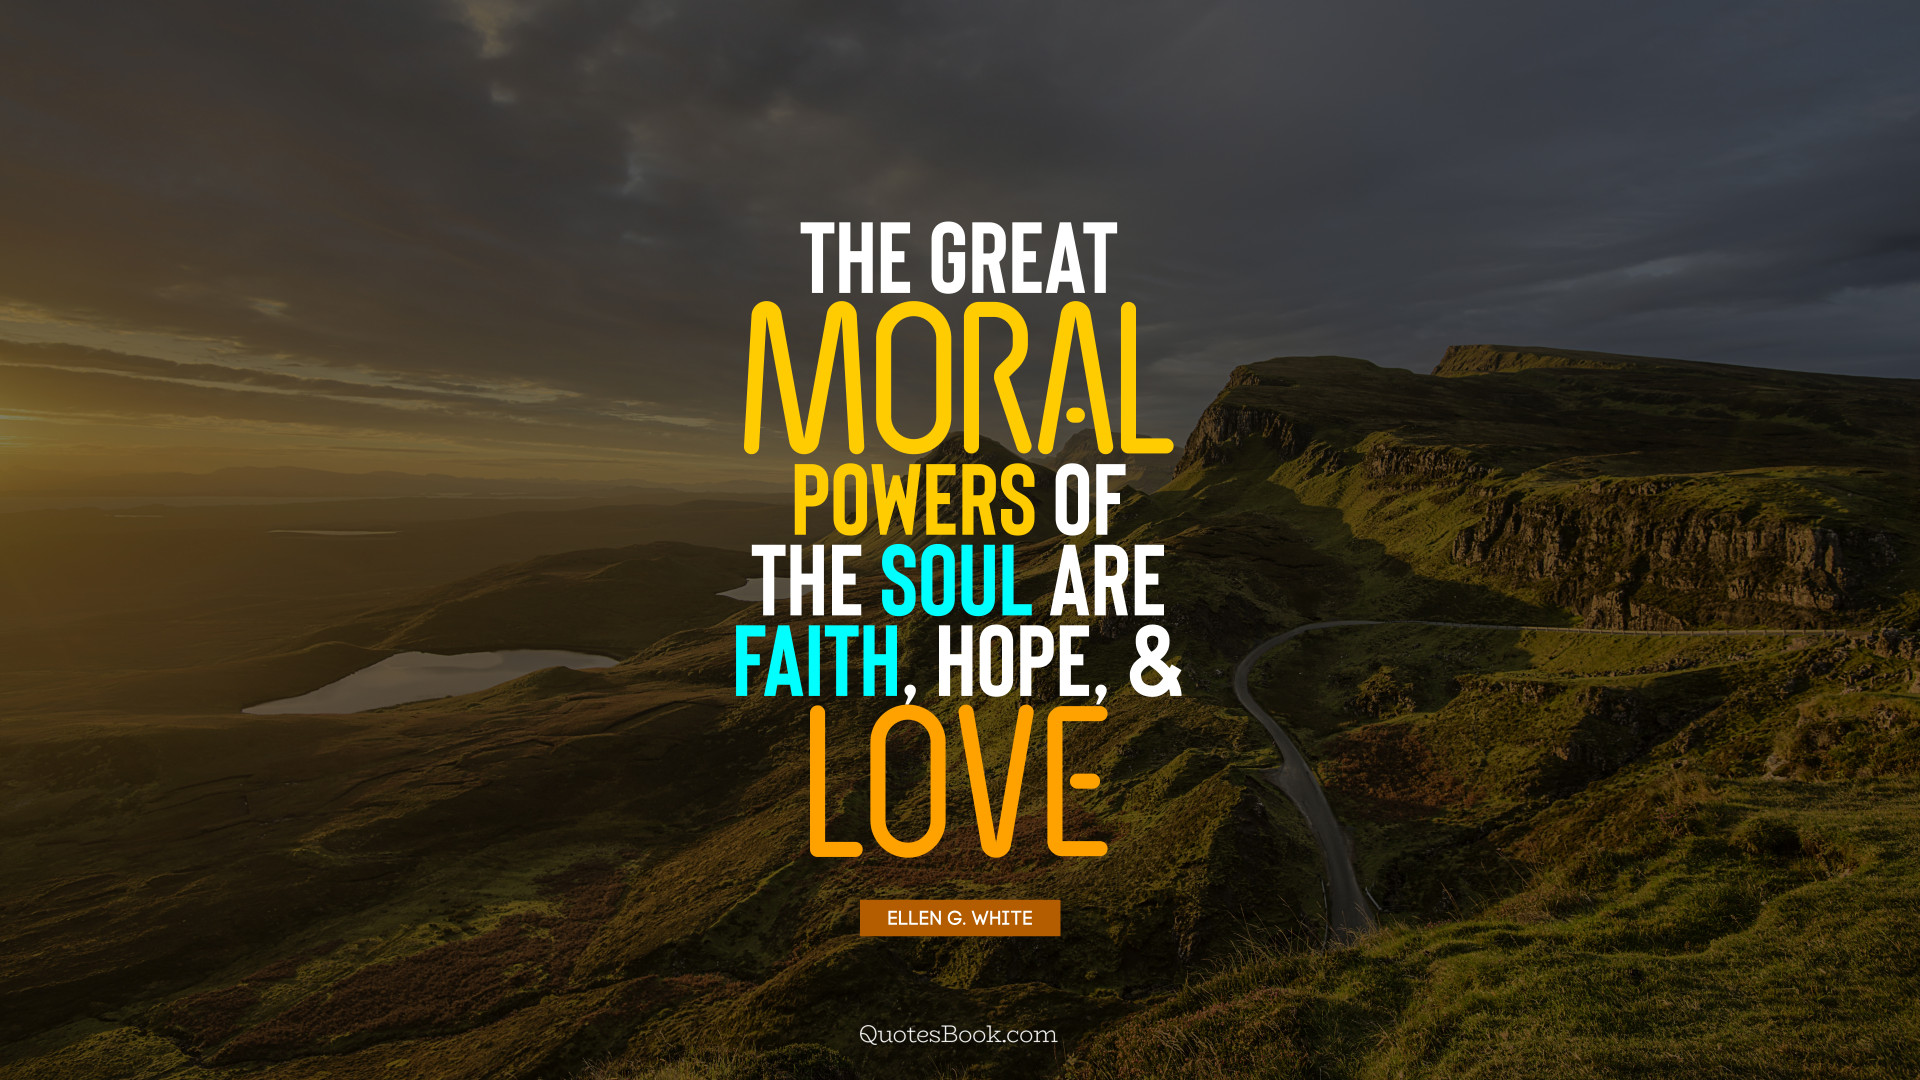 the great moral powers of the soul are faith hope and love 1920x1080 5805